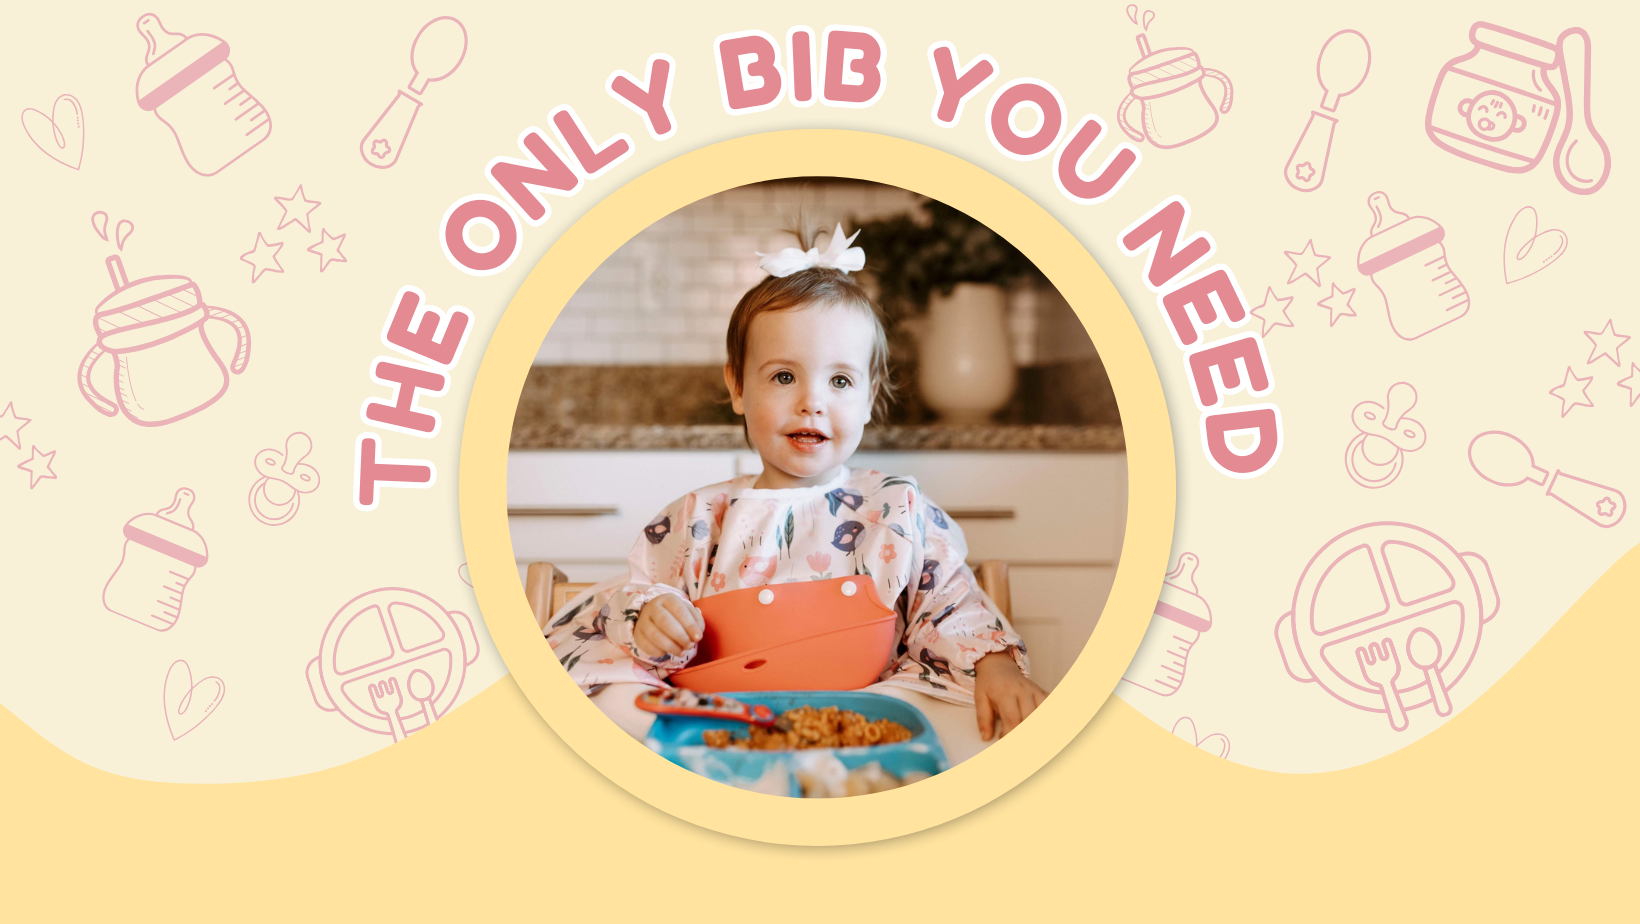 Cheerful toddler in a 'Little Birdie' Bibvy bib surrounded by illustrations of baby items, with the bold statement 'The Only Bib You Need'